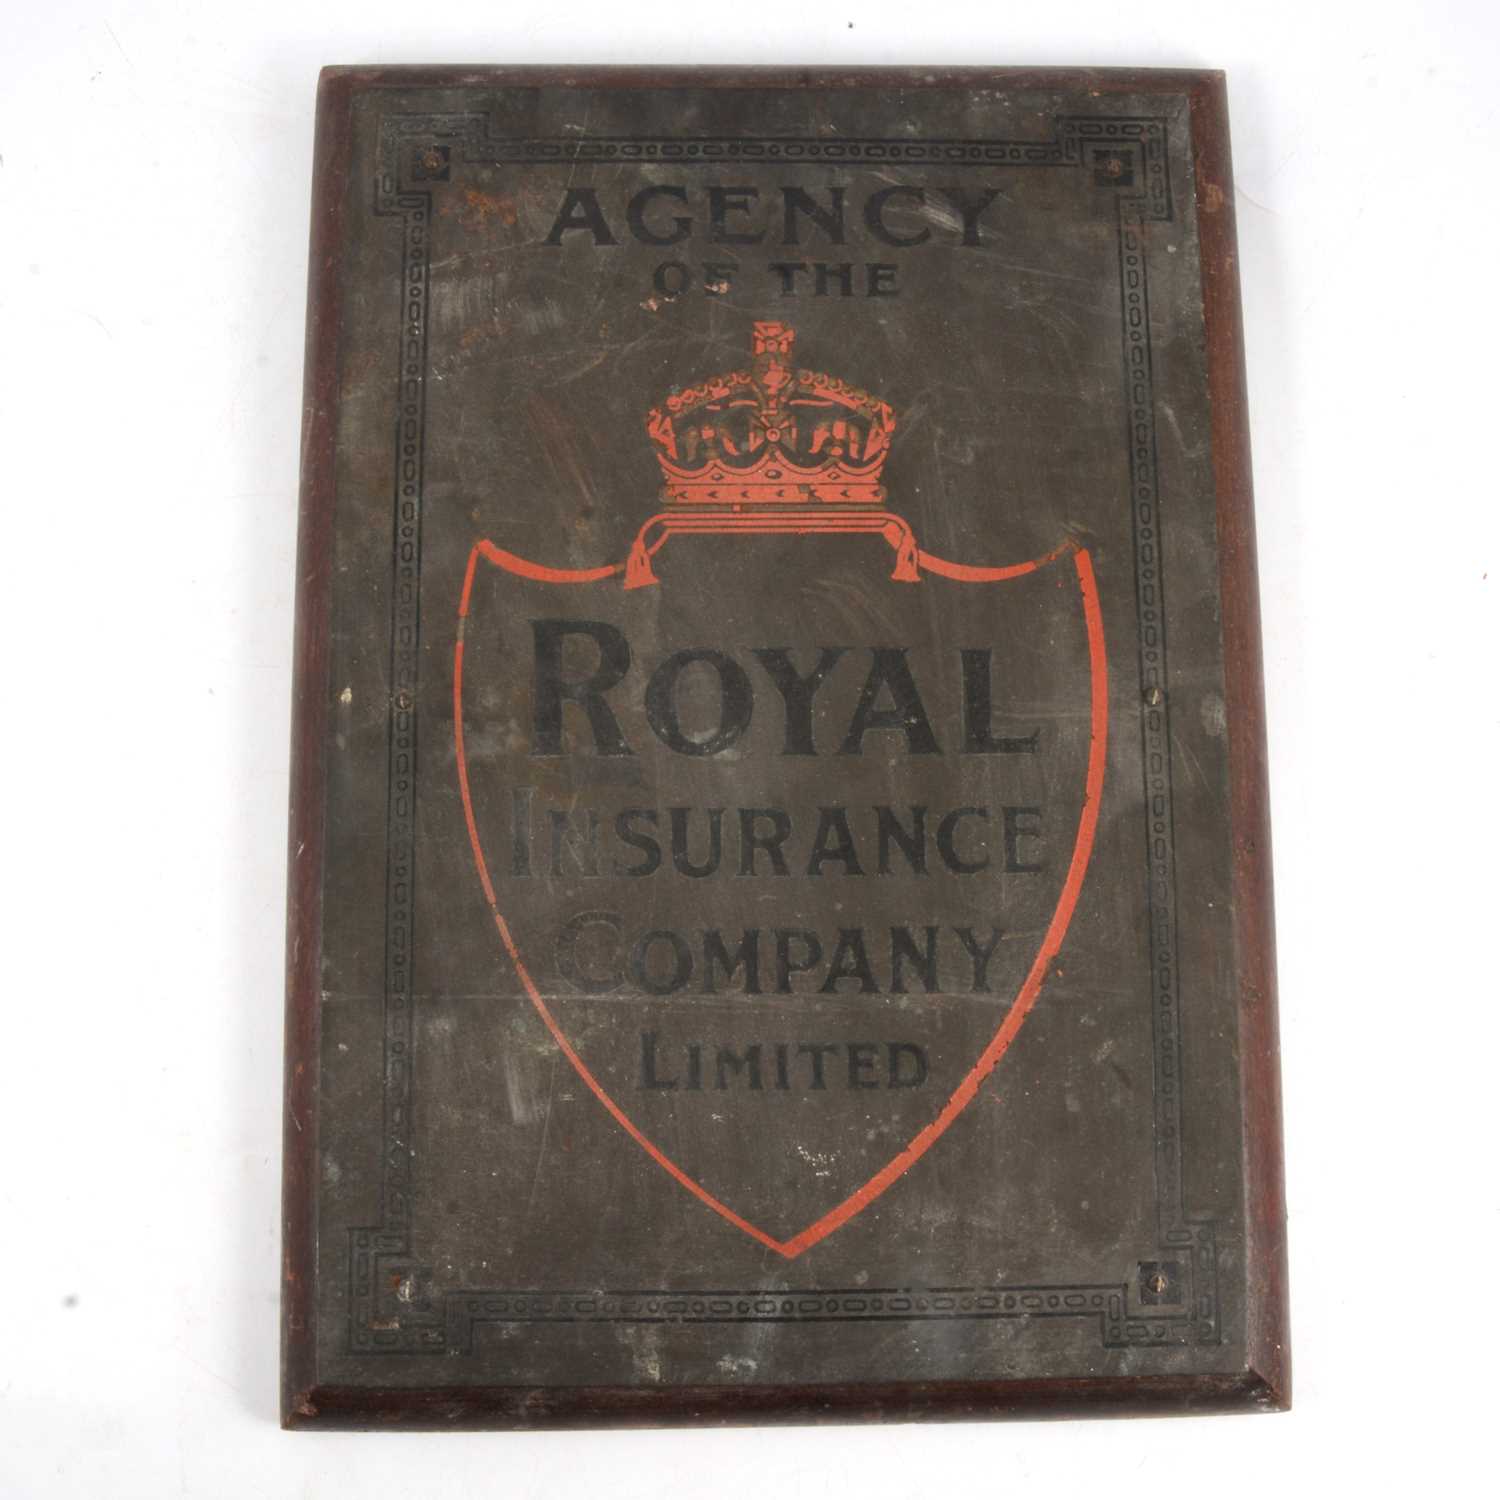 Lot 115 - Royal Insurance Company Limited agency plaque